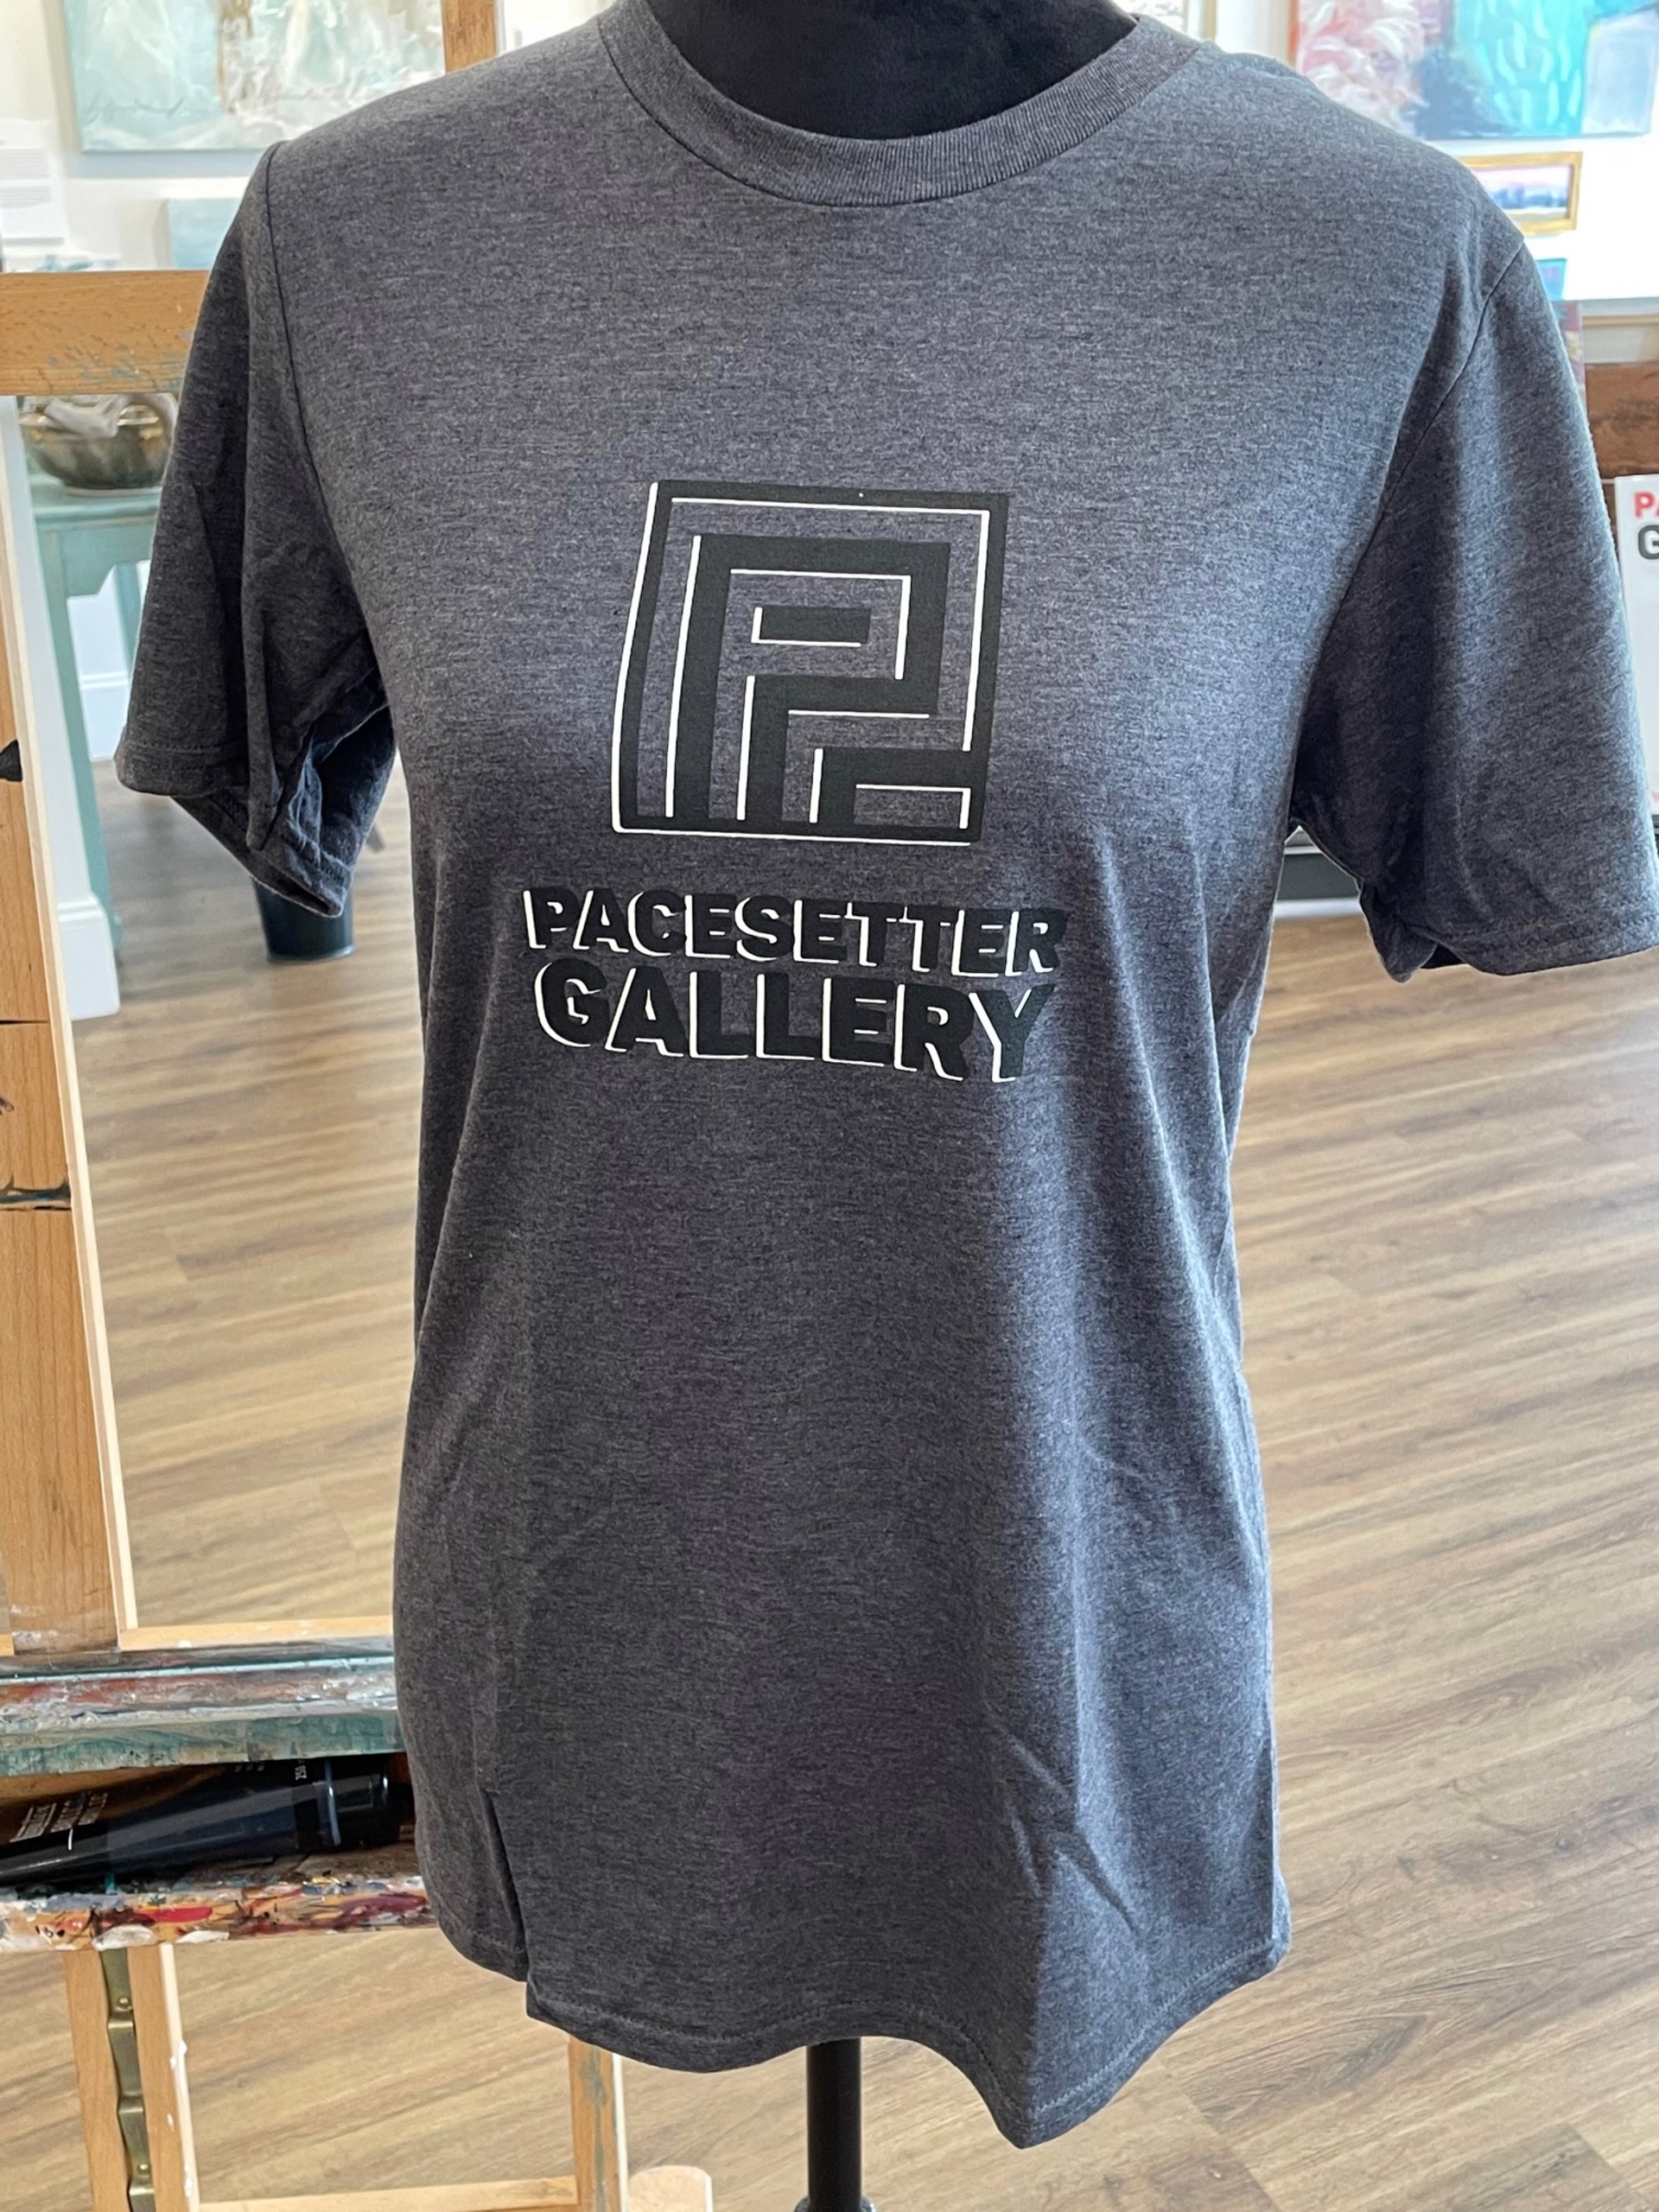 Pacesetter Gallery Unisex T-Shirt (LG) by Pacesetter Merchandise